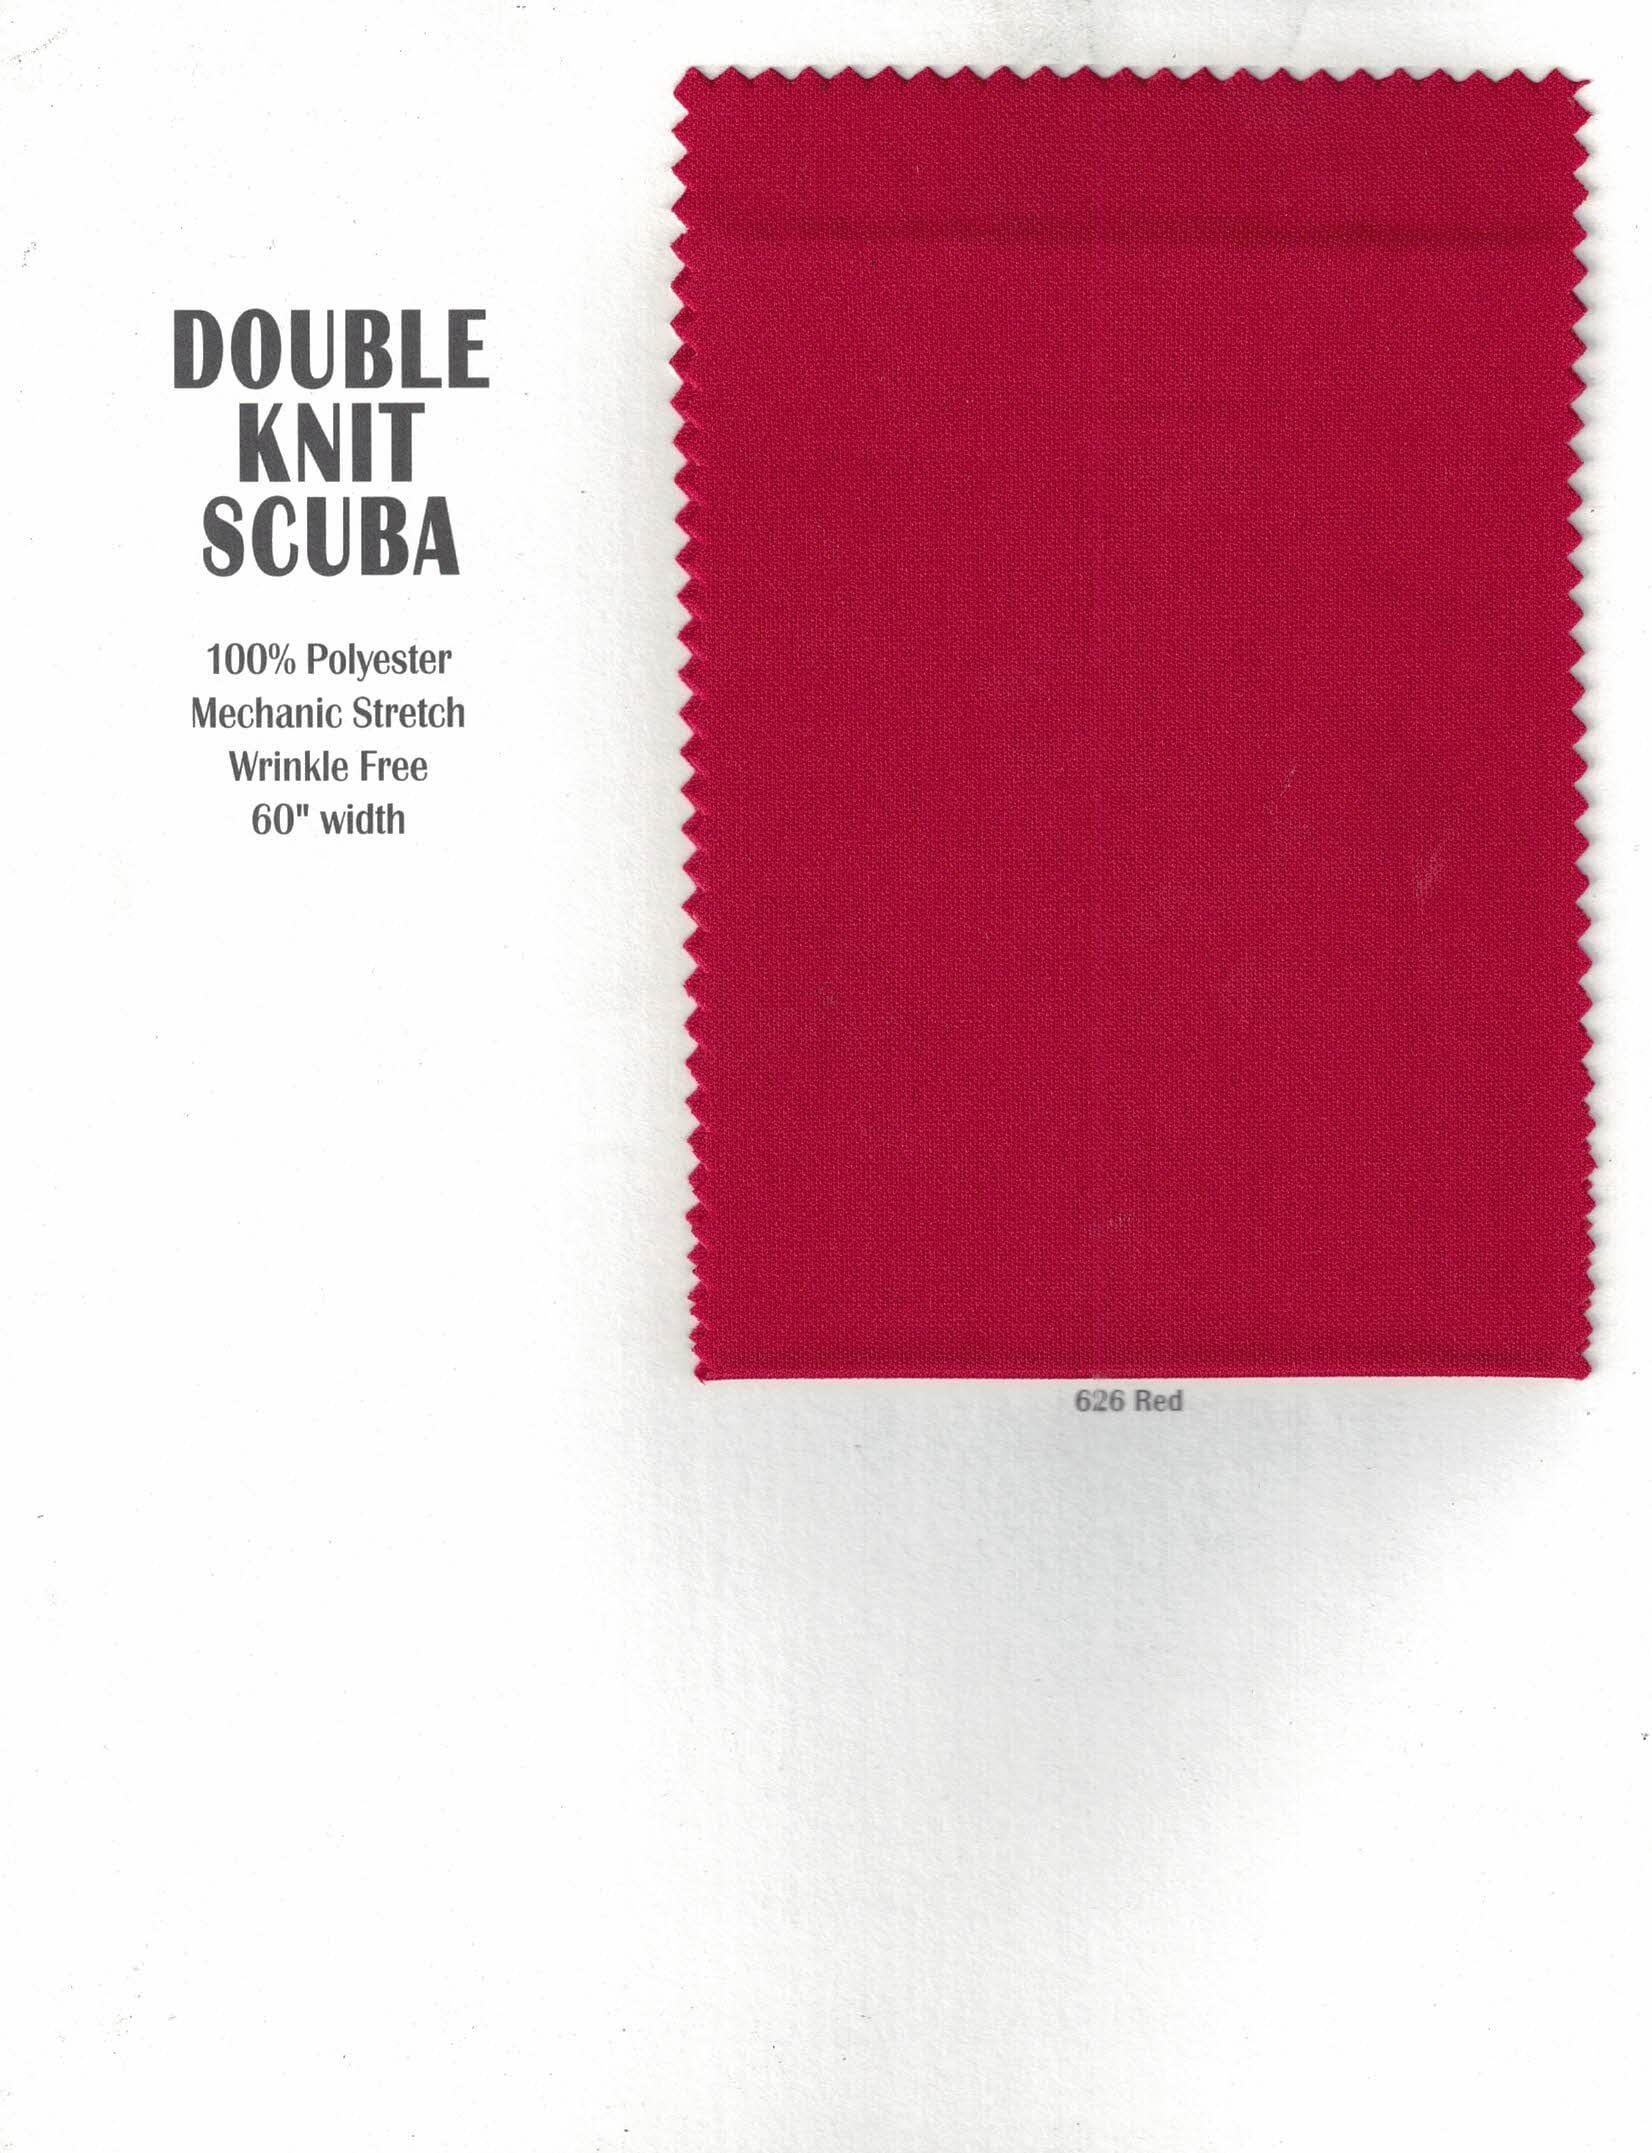 Scuba Double Knit Fabric | Basic Wrinkle Free Polyester Fabric with Mechanical Stretch | 60" Wide | Multiple Colors | Poly Knit Fabric | Fabric mytextilefabric 